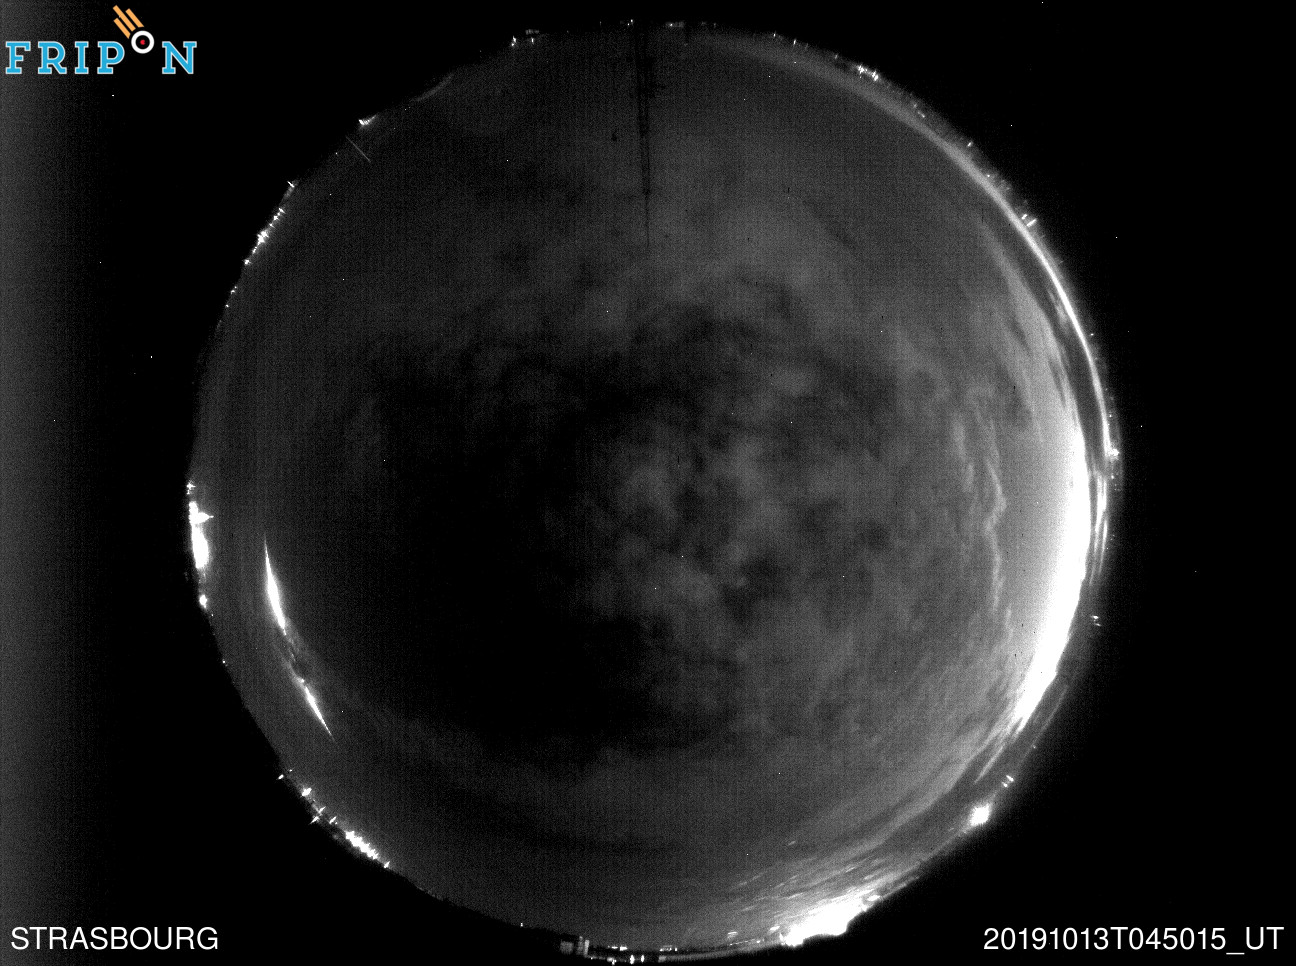 Fireball recorded by the FRIPON Camera in Strasbourg, 13 October 2019.